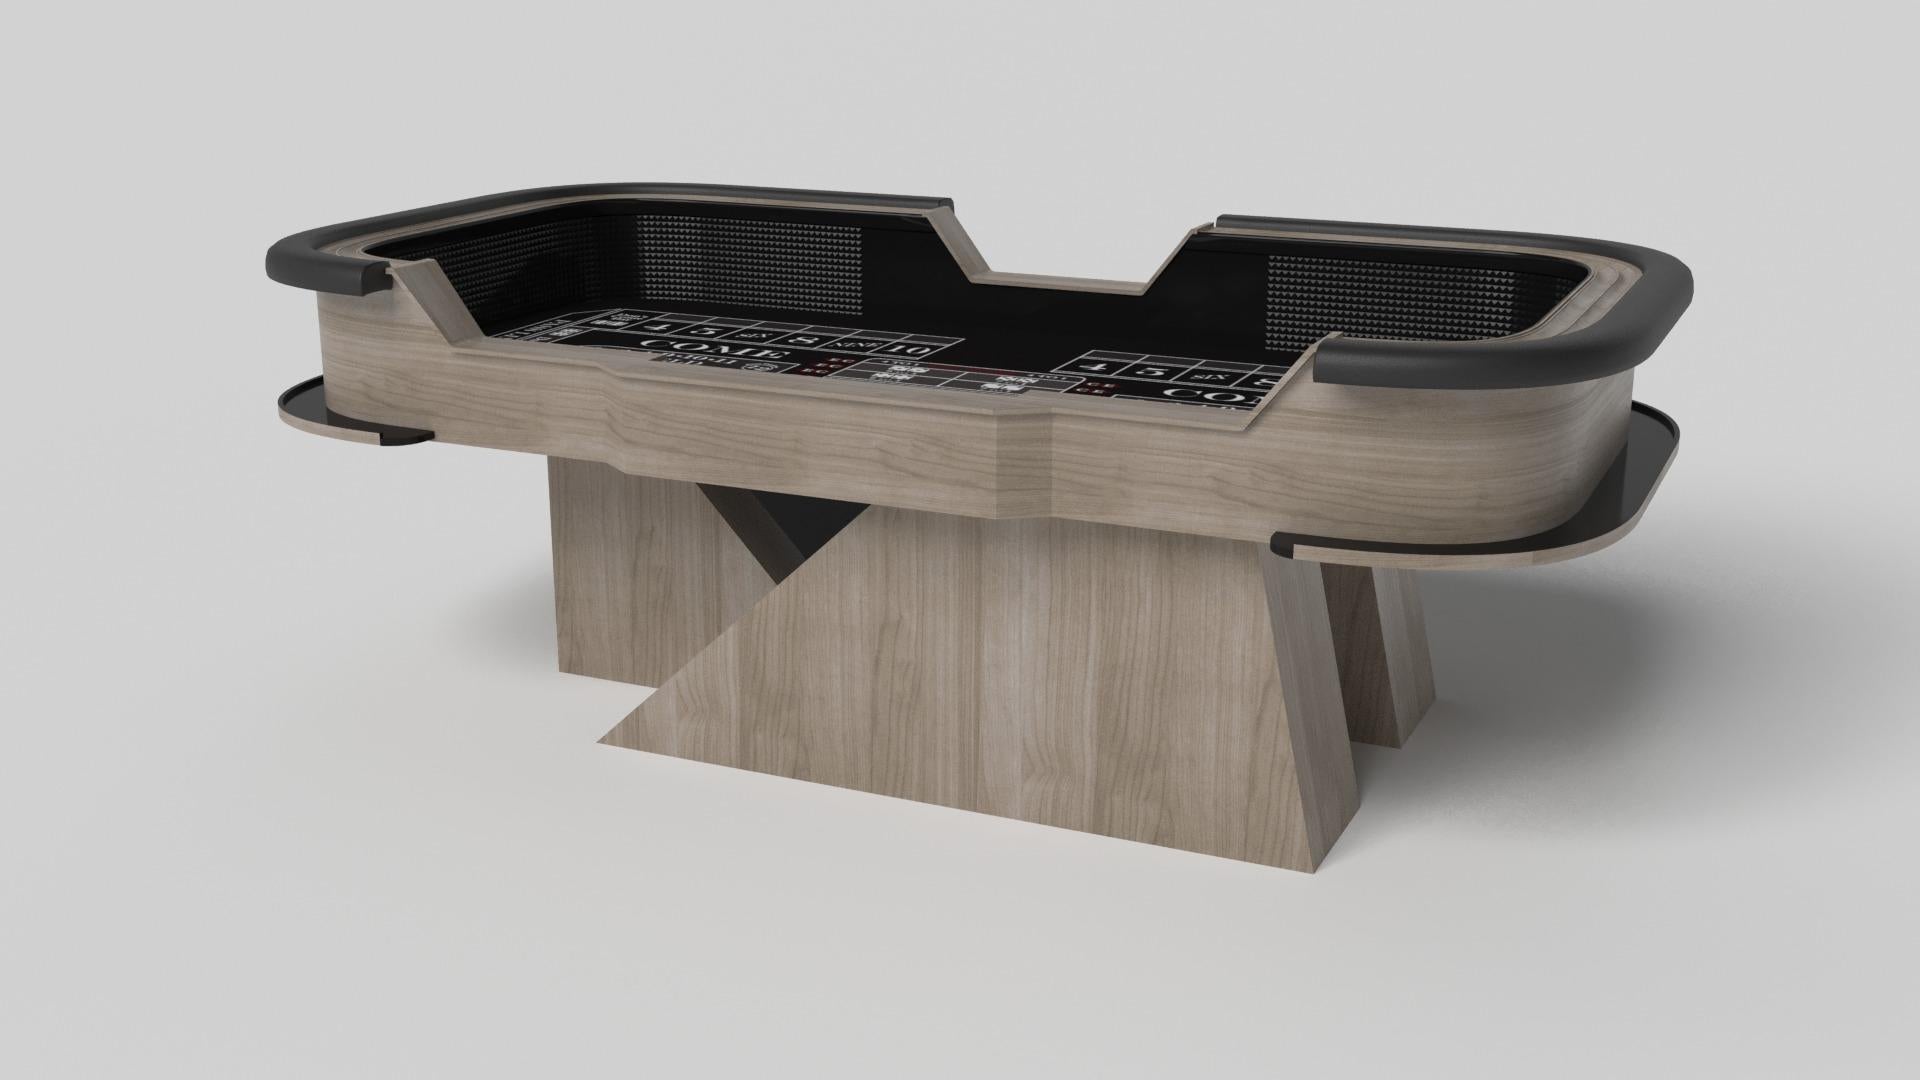 An asymmetric base creates a free-floating silhouette, making the Stilt craps table in walnut a compelling, contemporary addition to the modern home. Detailed with point boxes and betting blocks, this luxury handcrafted game table boasts an